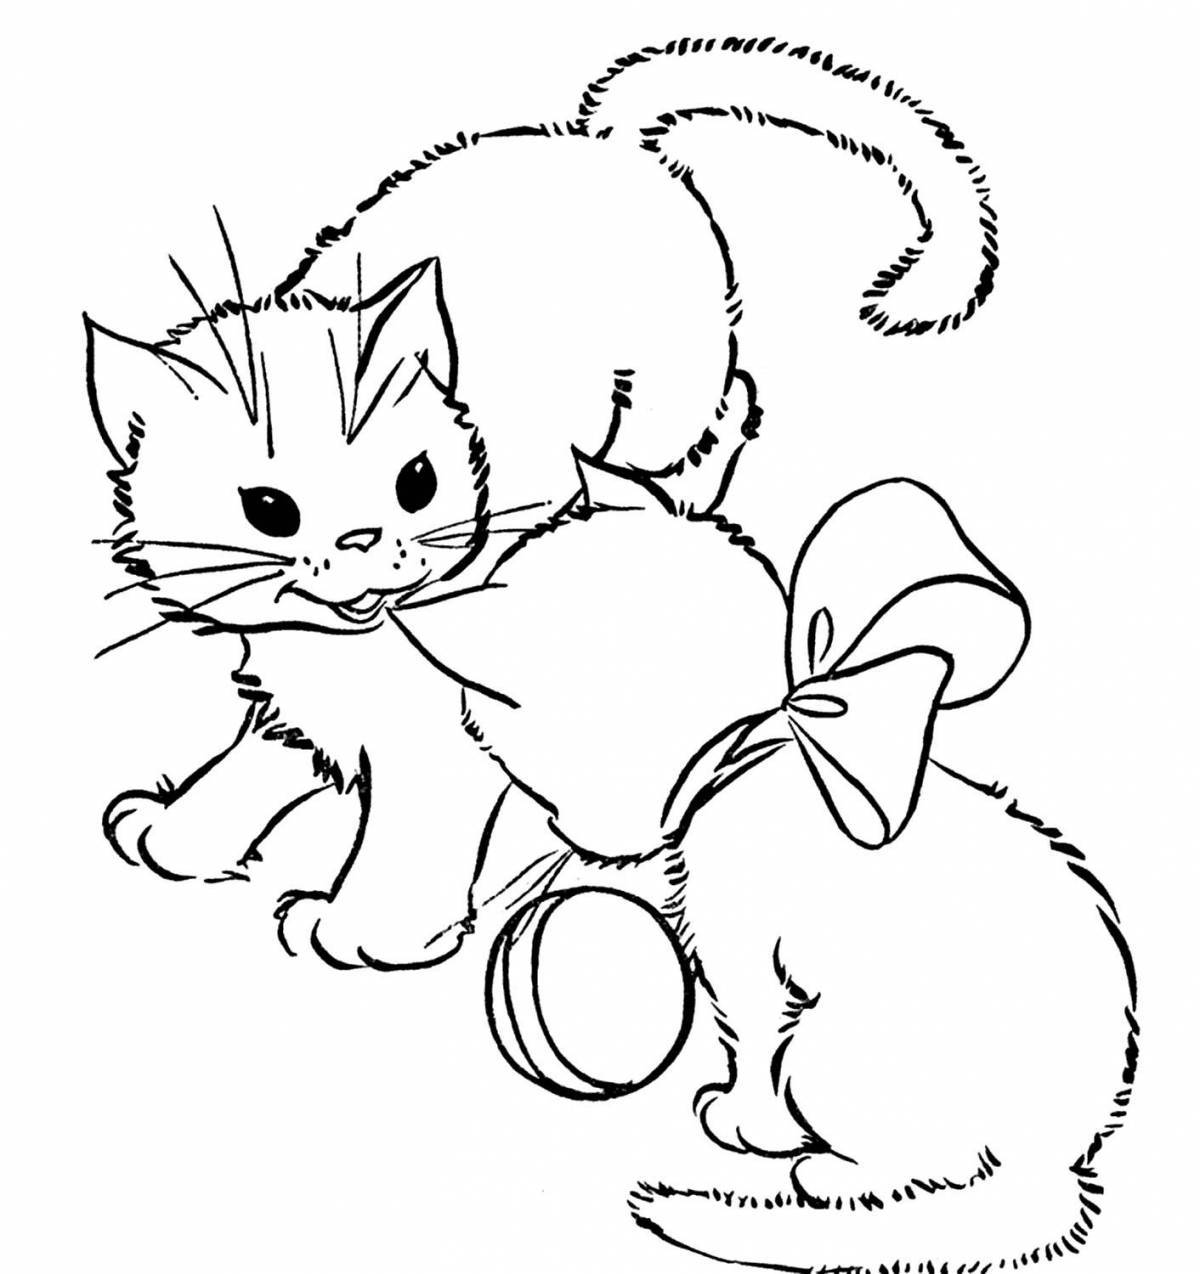 Friendly cats coloring pages for kids